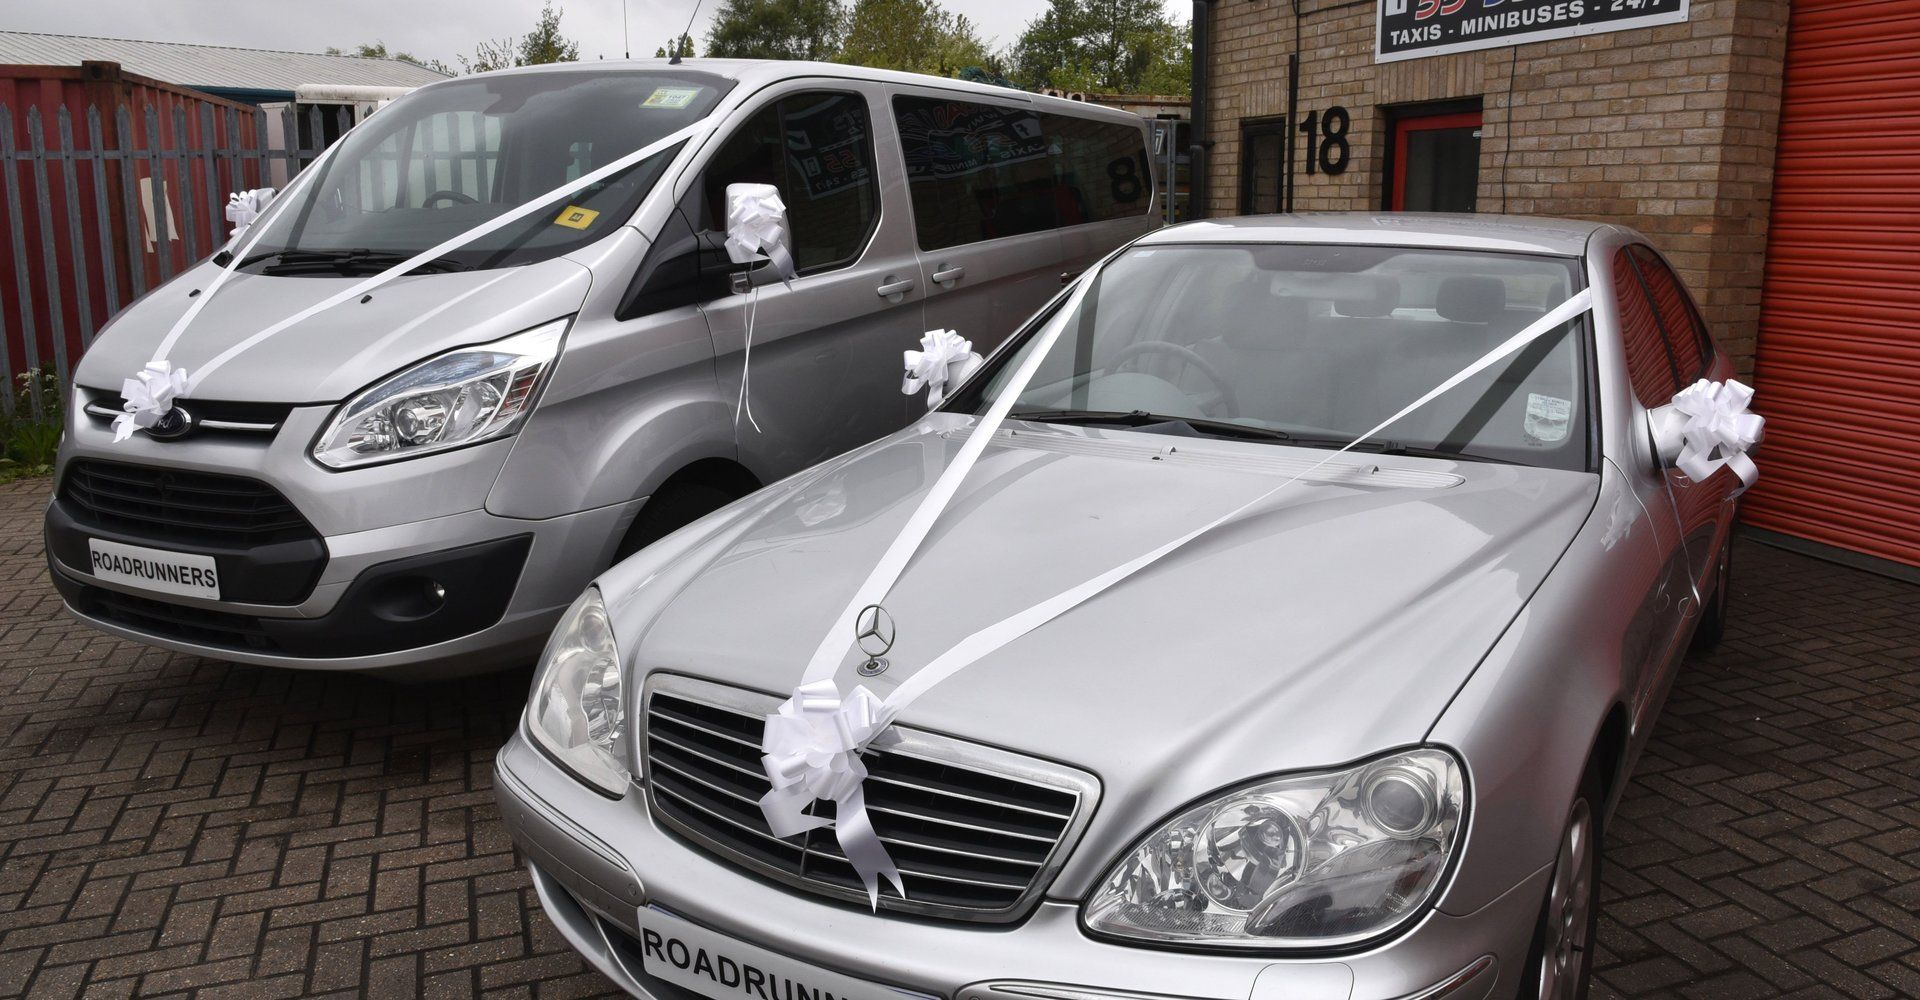 Roadrunners Taxis' Wedding Vehicles